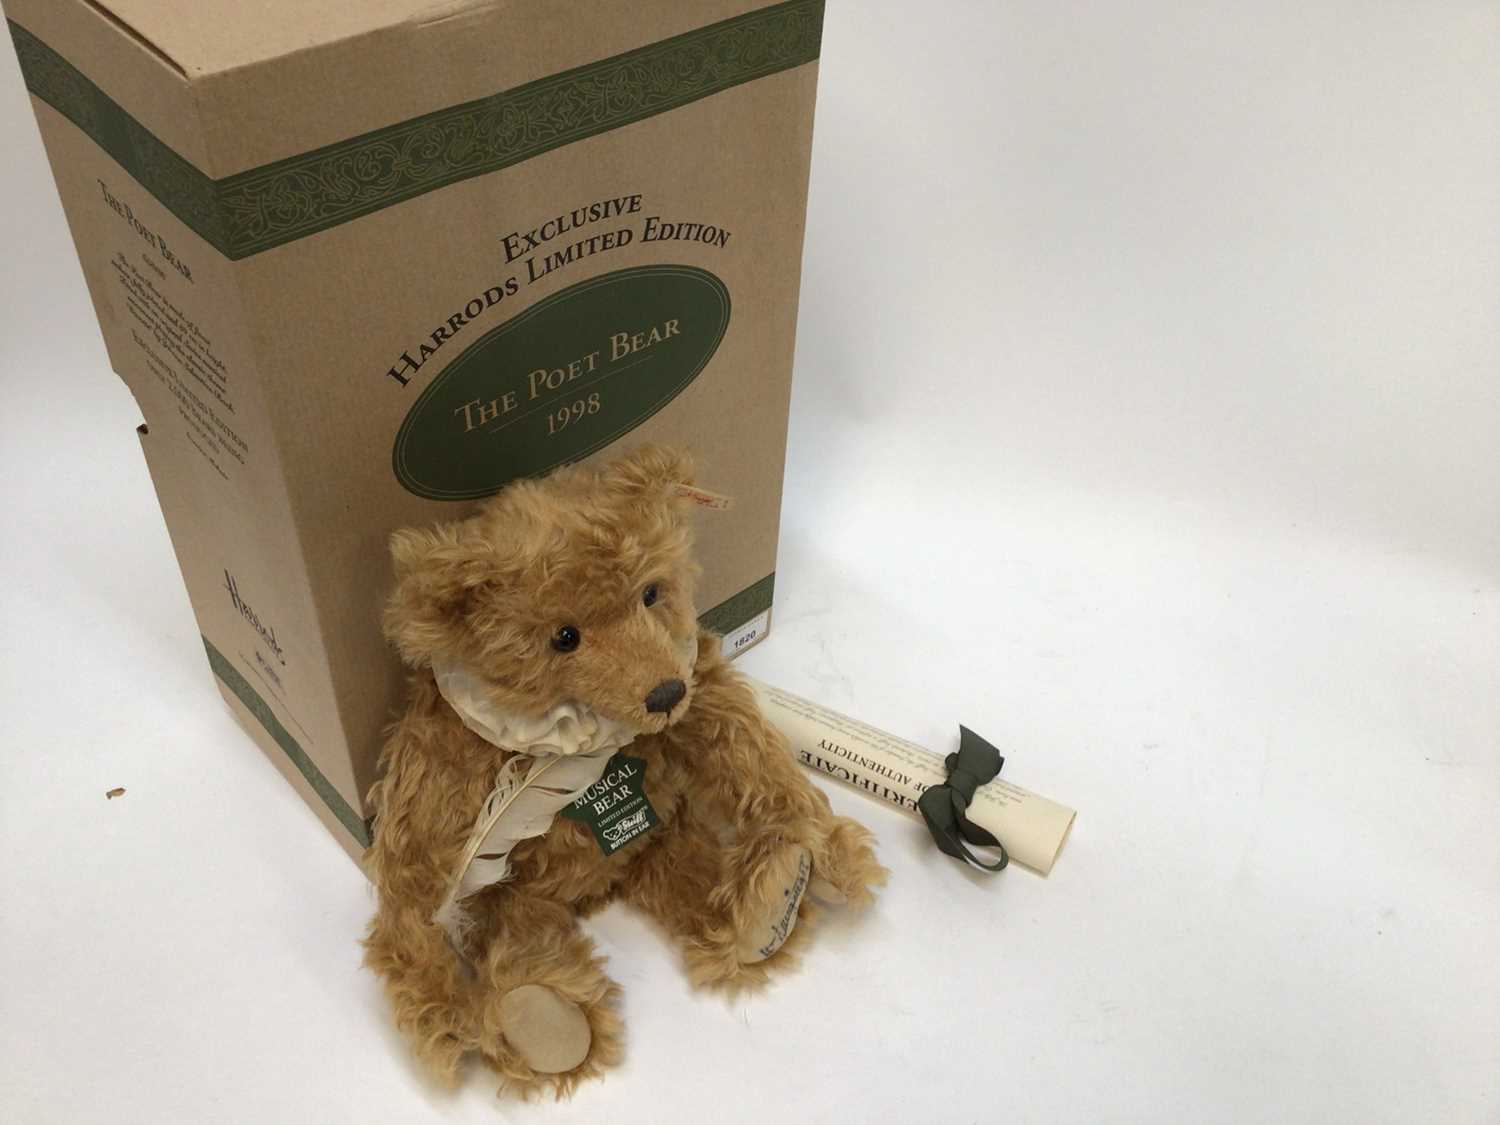 Lot 1820 - Steiff 1998 Poet bear 653186, Teddy Bears in Motorboat 037405, Jack in the Box 037818 and 2001 Musical Bear 670961.  All boxed with certificates.